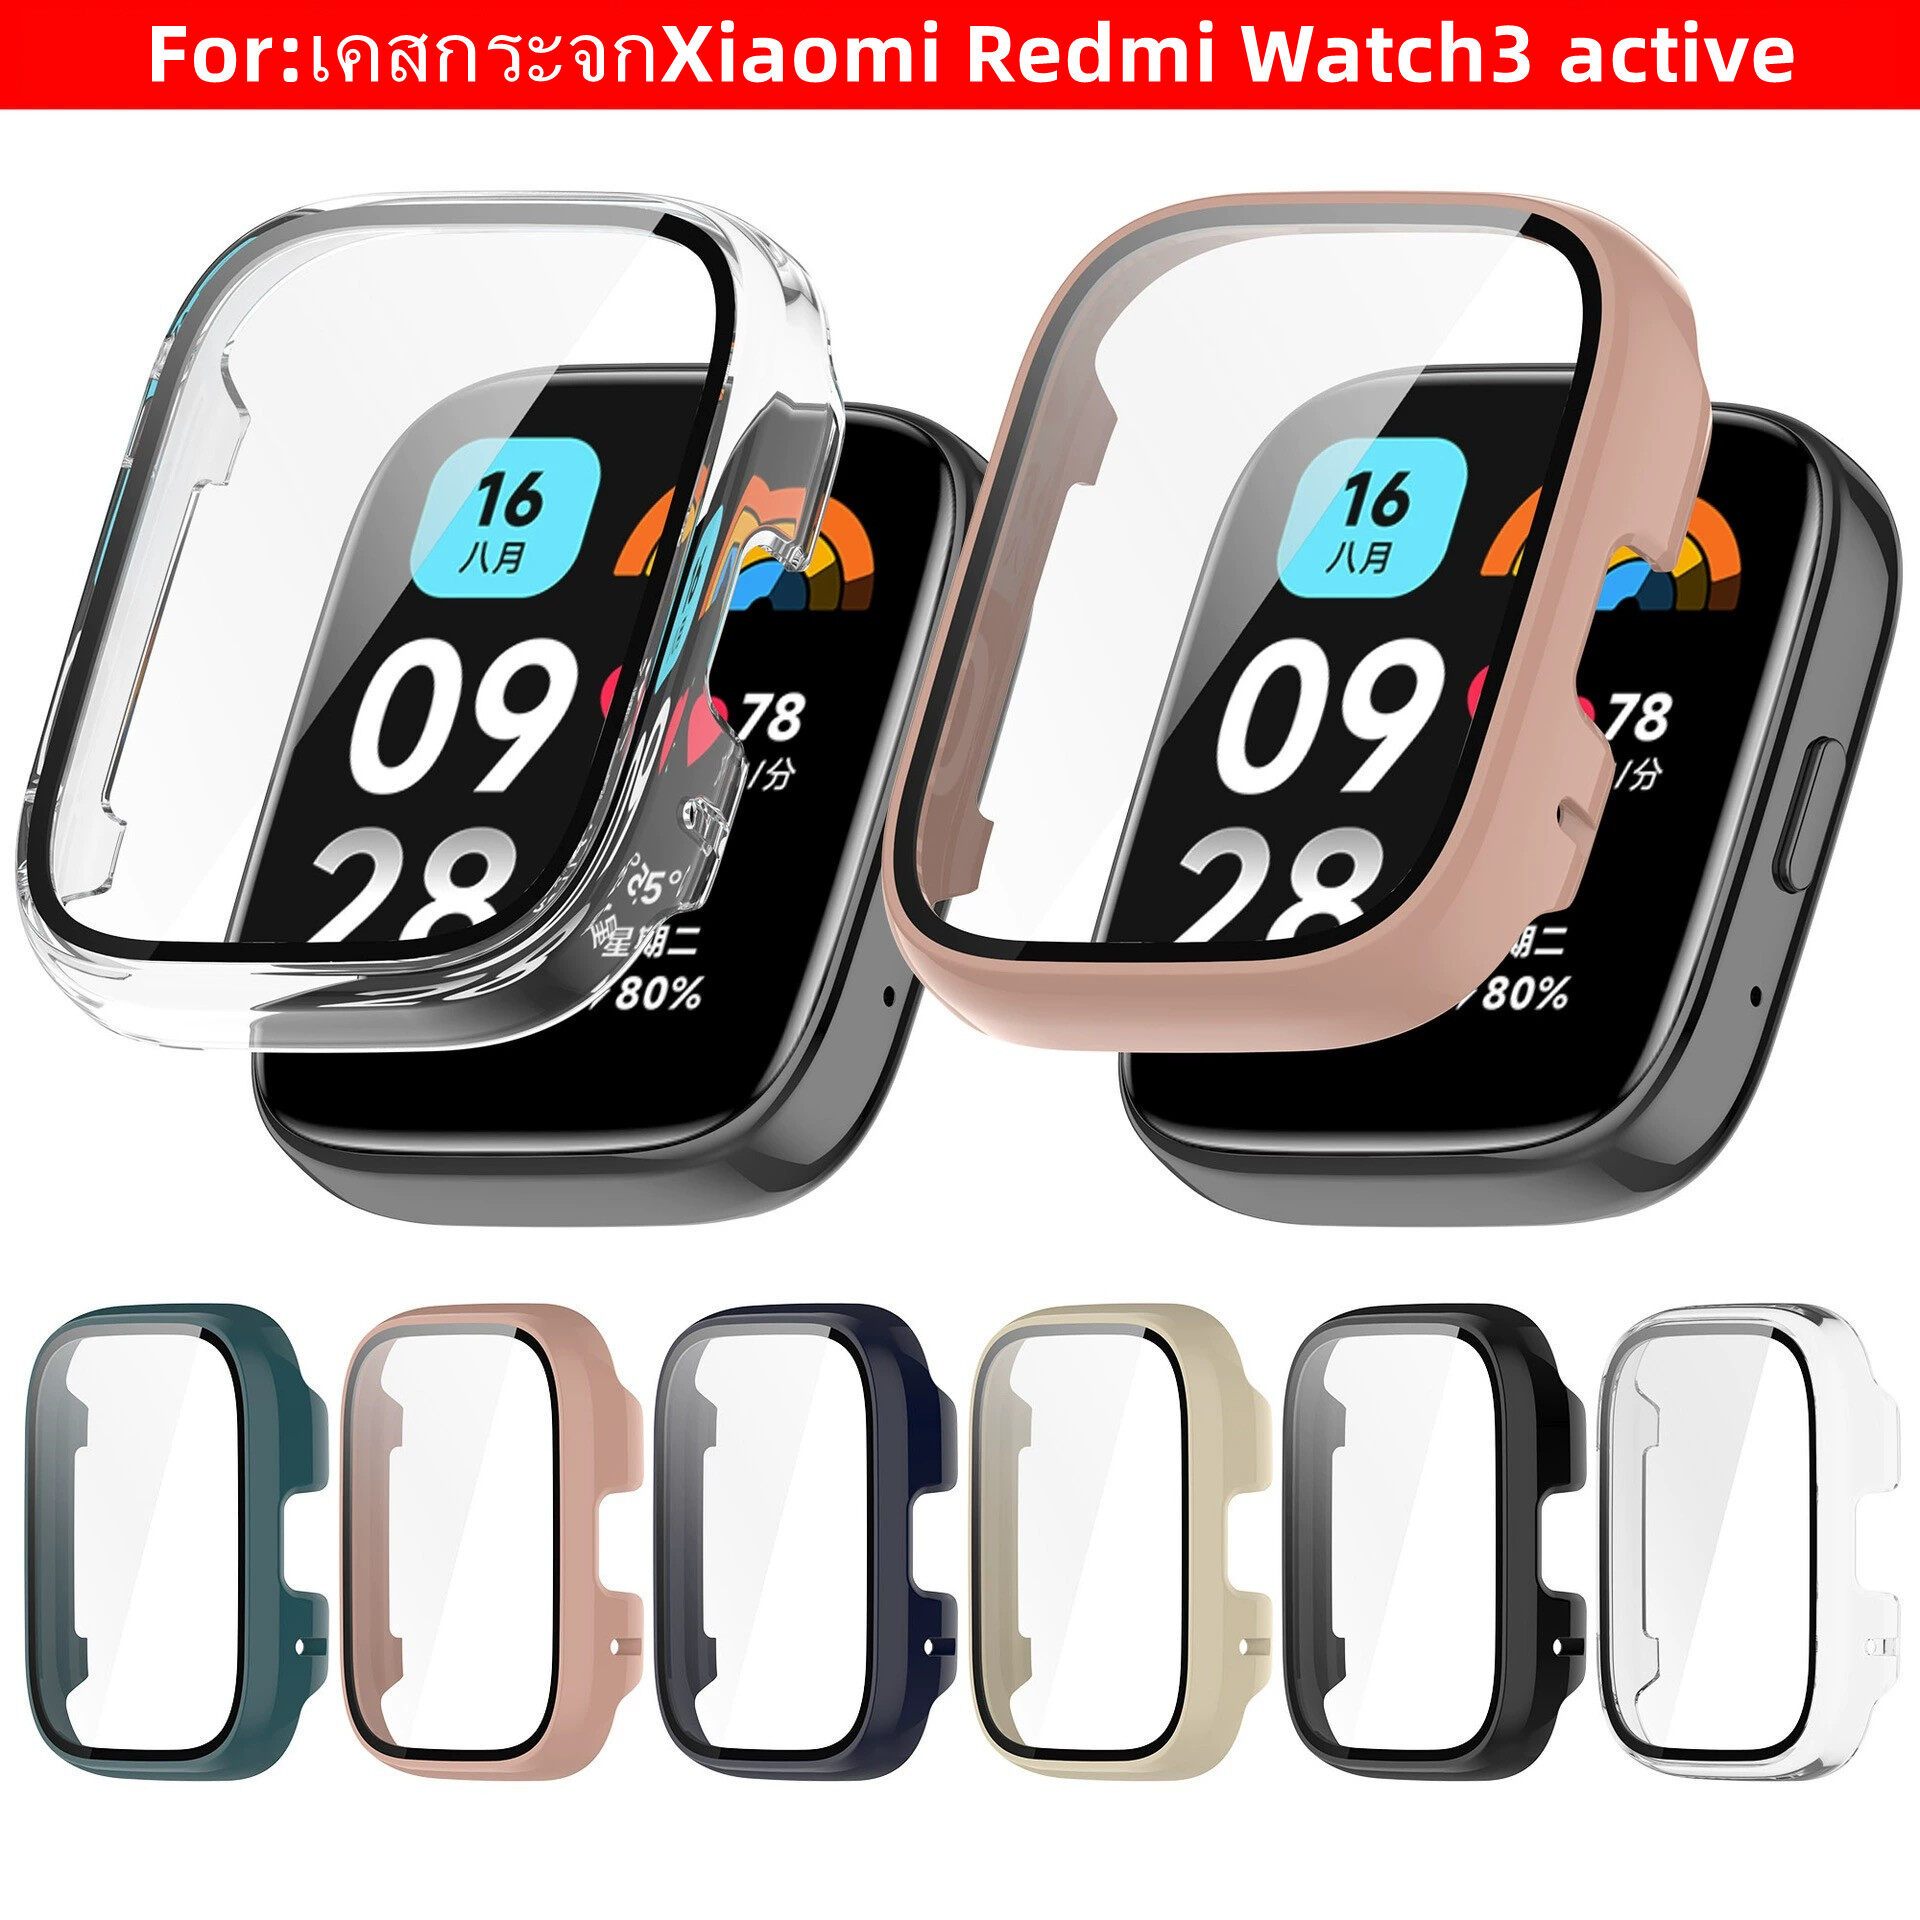 Kingzalin For Redmi Watch 3 PC Case Tempered Glass Full Cover